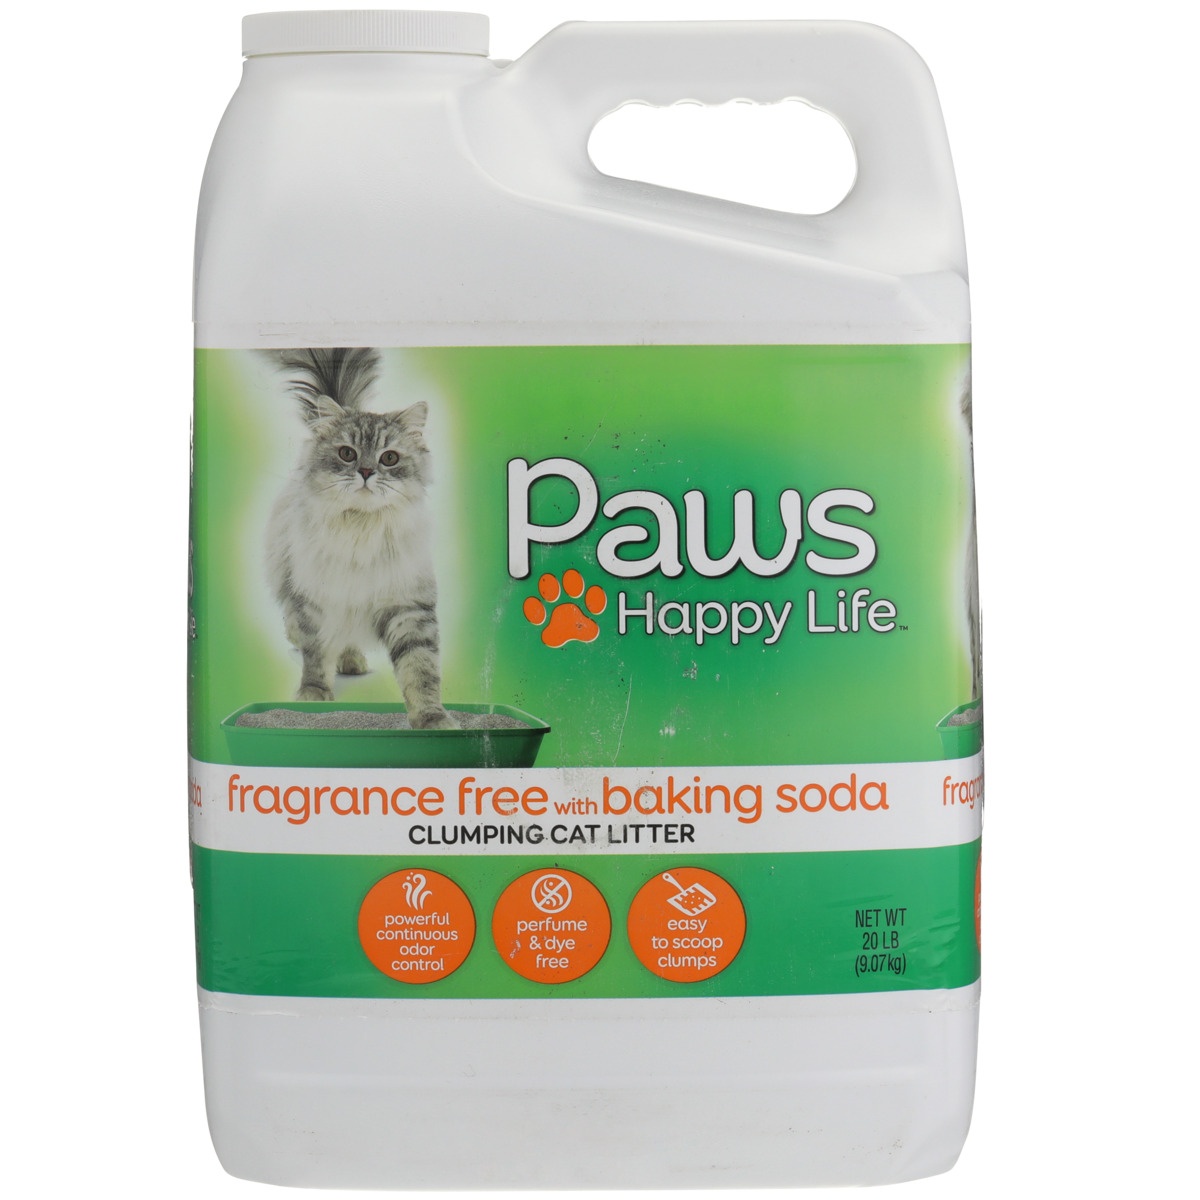 slide 7 of 8, Paws Happy Life Fragrance Free With Baking Soda Clumping Cat Litter, 20 lb